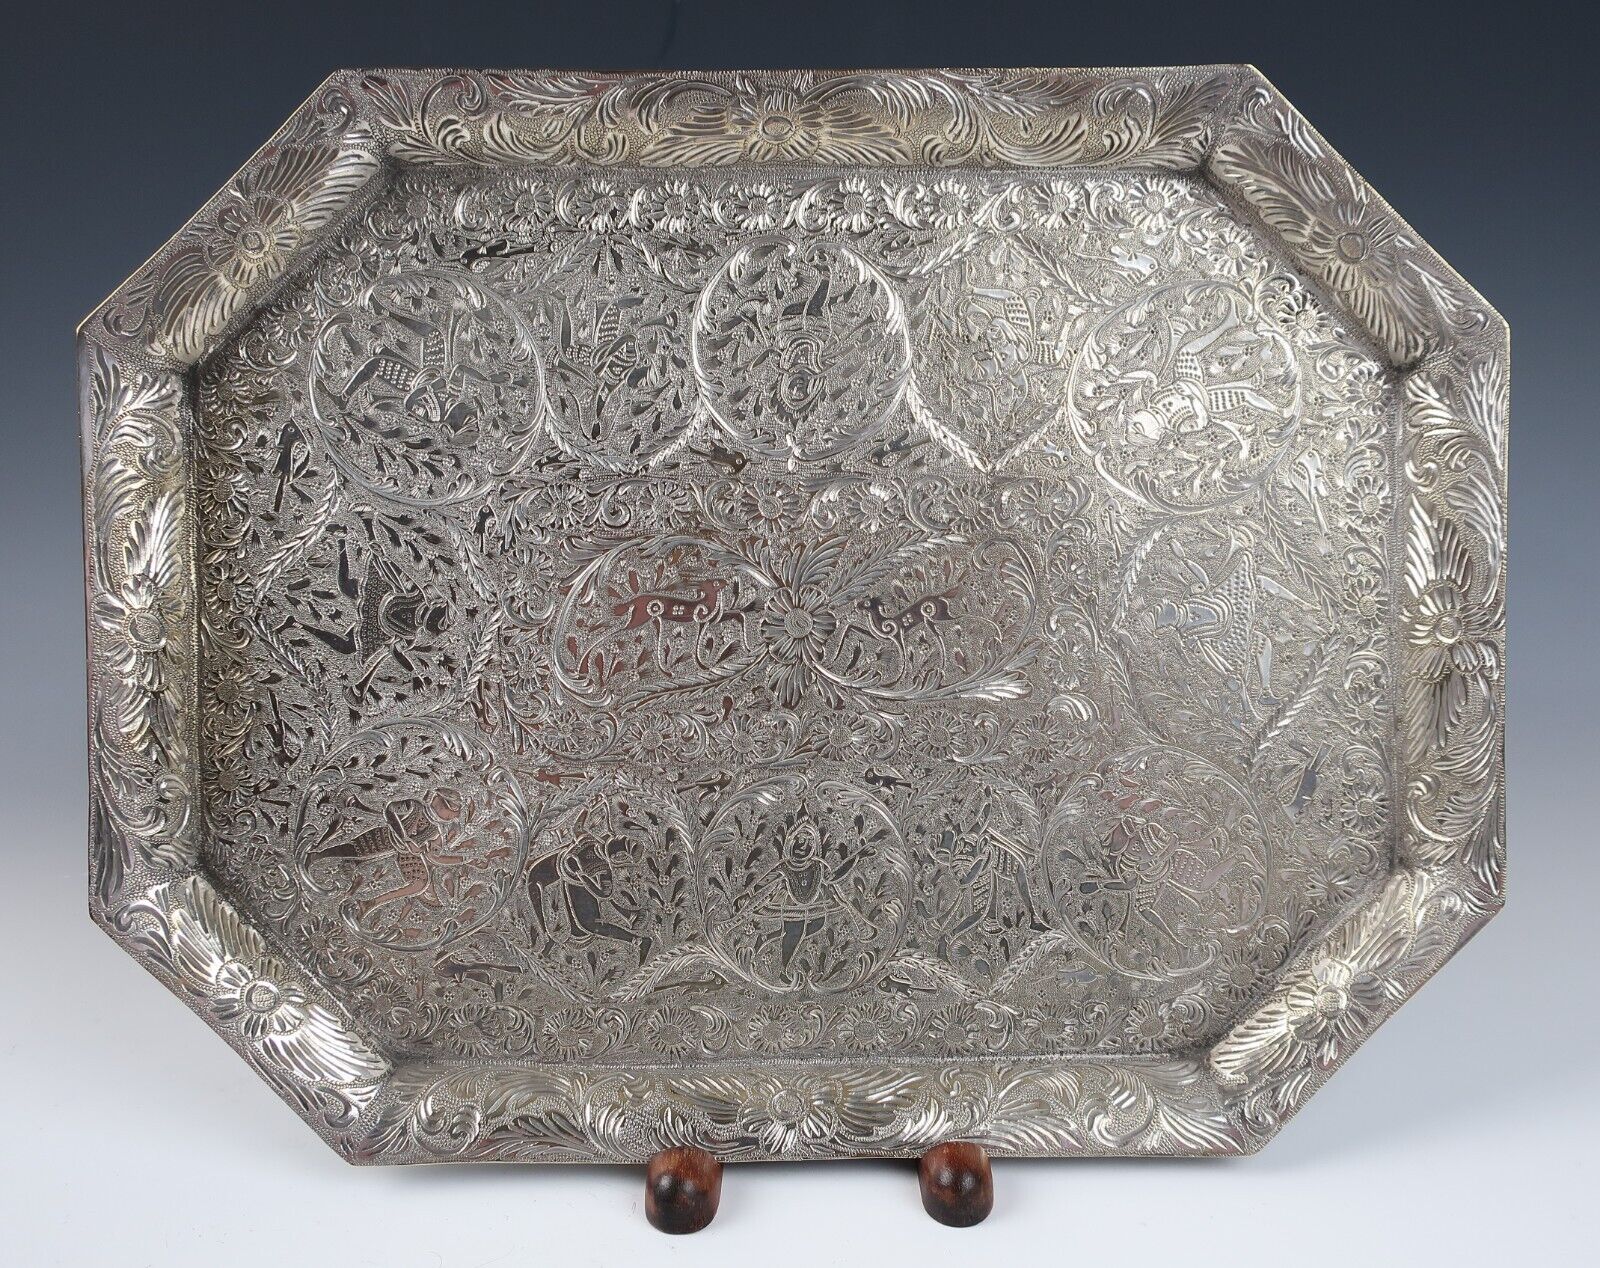 Quality Antique Engraved Silver Plated Tray Islamic Figures Animal Persian India